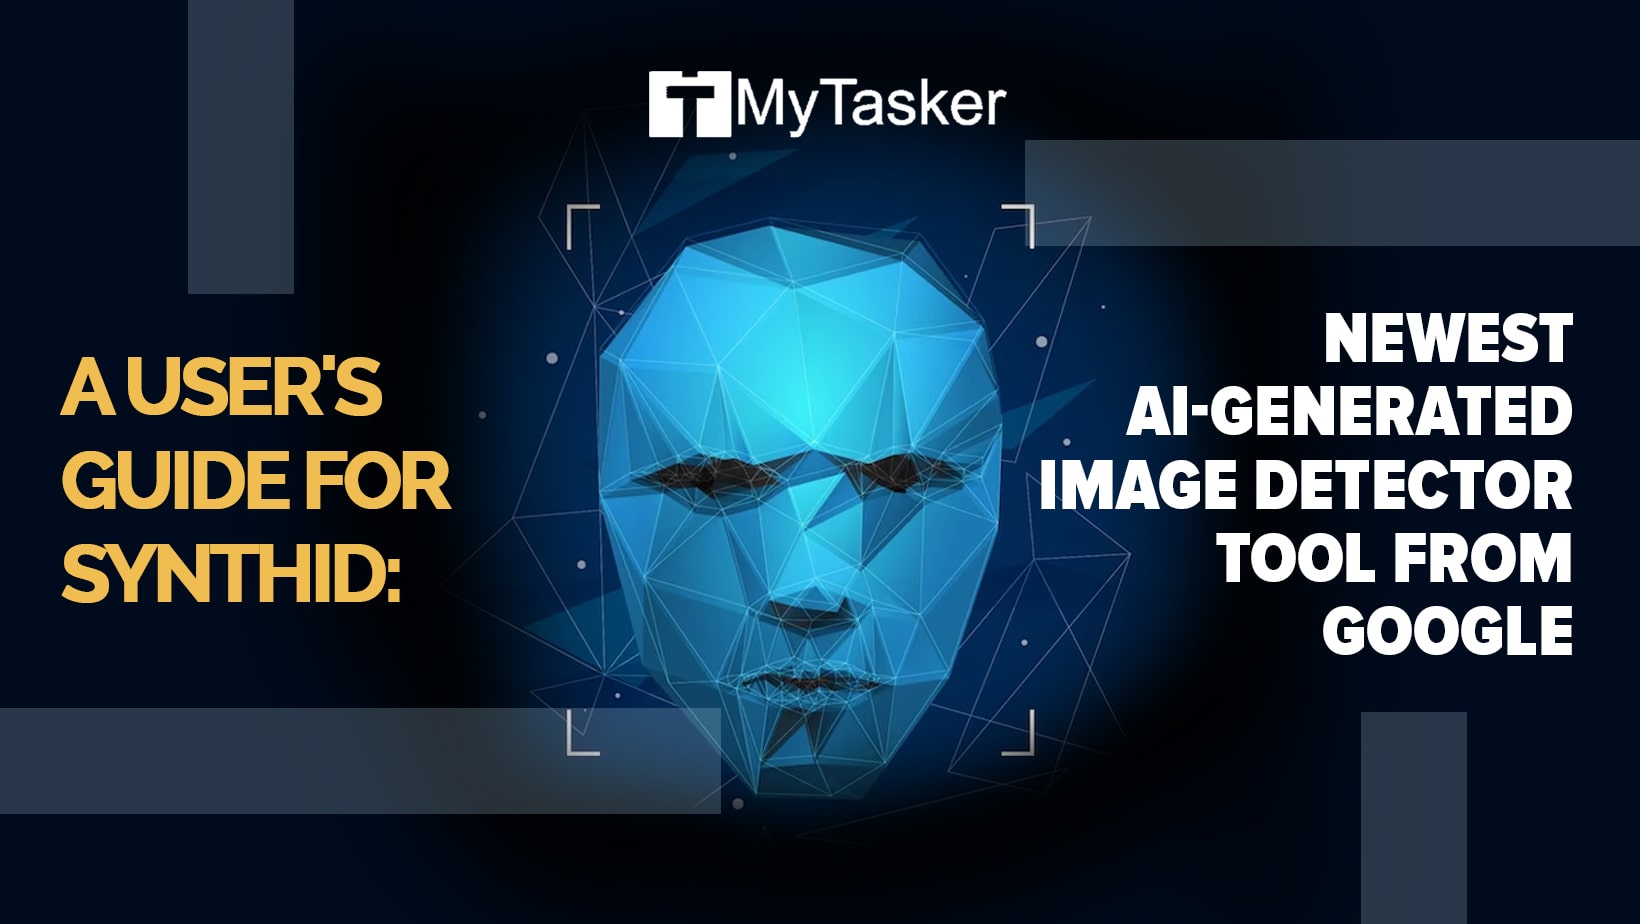 A User's Guide for SynthID: Newest AI-Generated Image Detector Tool From Google